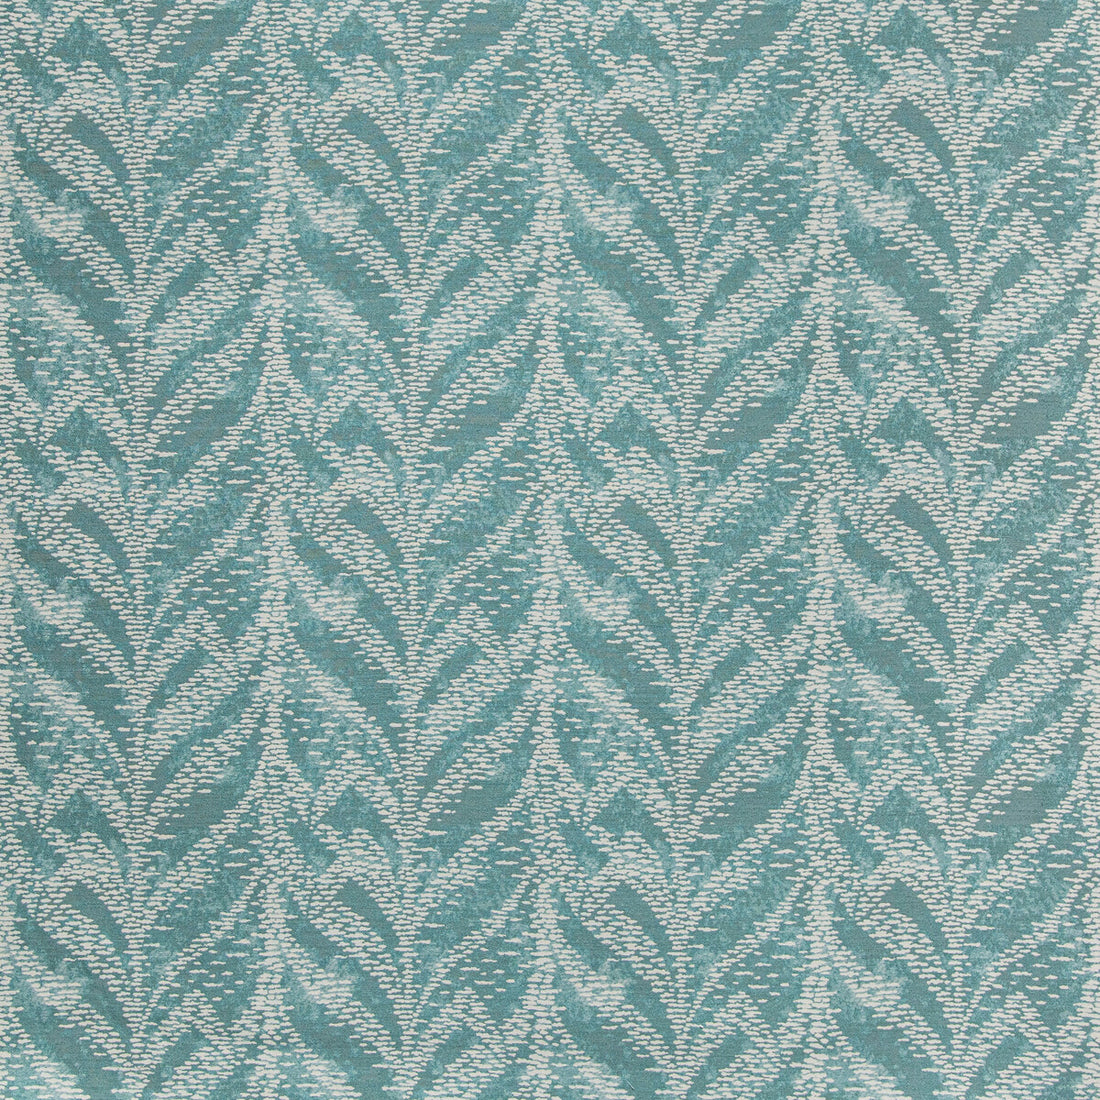 Pompano fabric in lagoon color - pattern 35818.13.0 - by Kravet Design in the Indoor / Outdoor collection